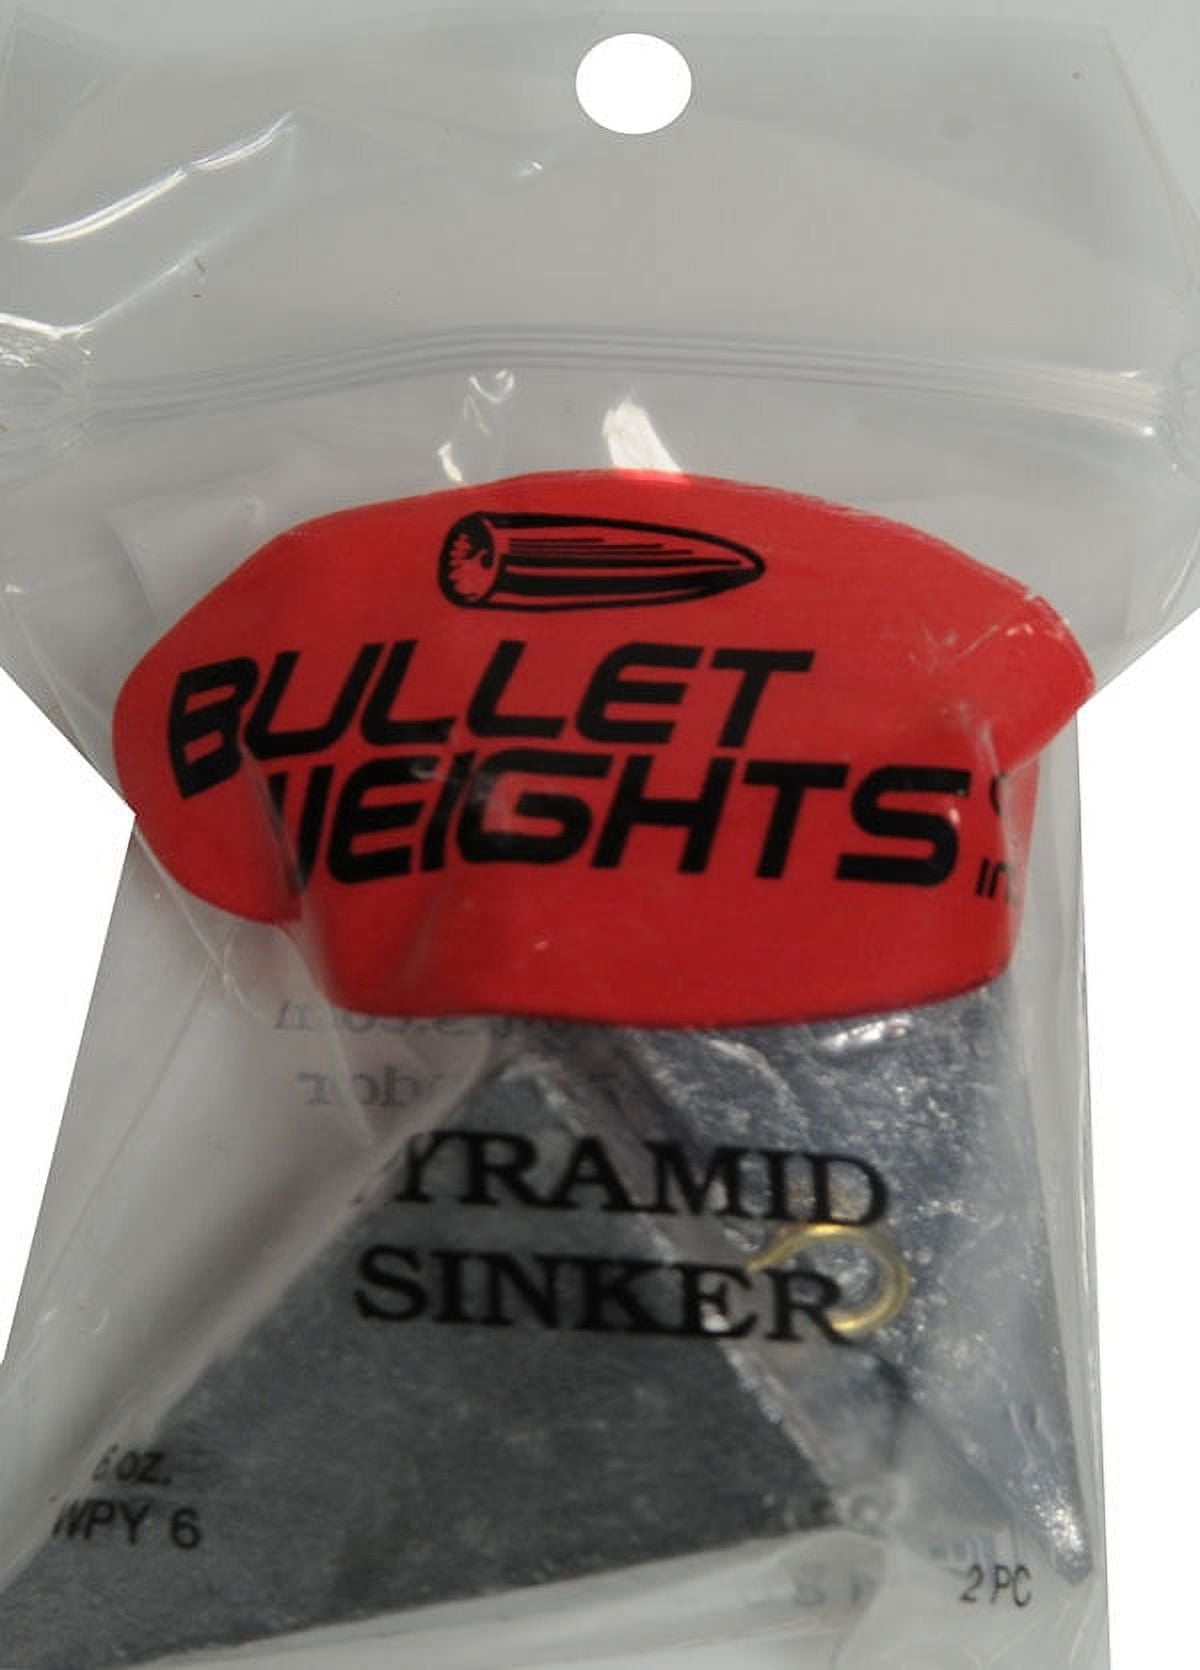 Bullet Weights® WPY6-24 Lead Pyramid Sinker Size 6 oz Fishing Weights 